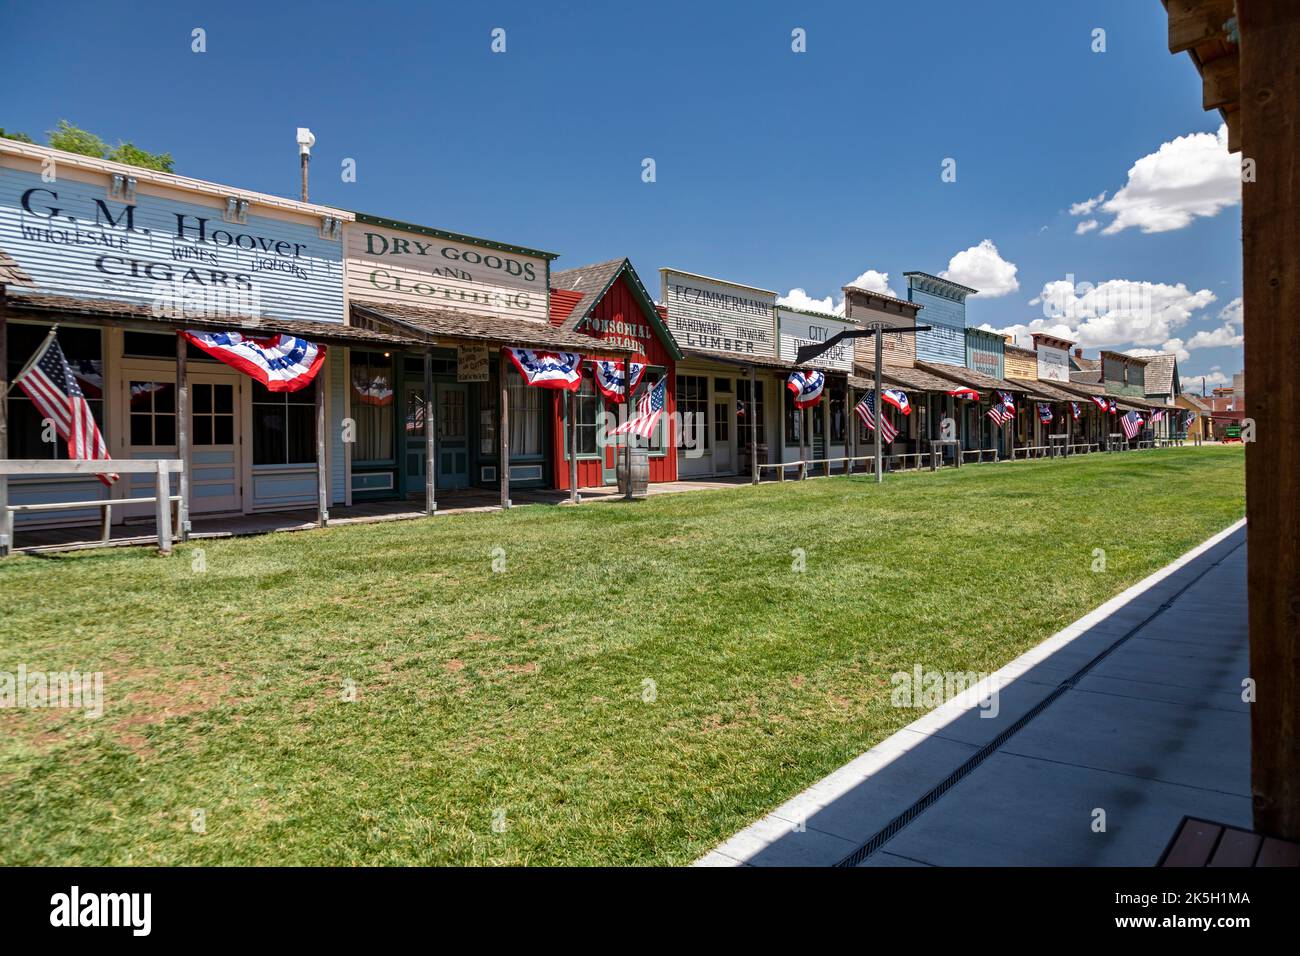 Dodge City, Kansas - Boot Hill Museum, decorated for a July 4th celebration. The museum preserves the history and culture of the old west. Located on Stock Photo